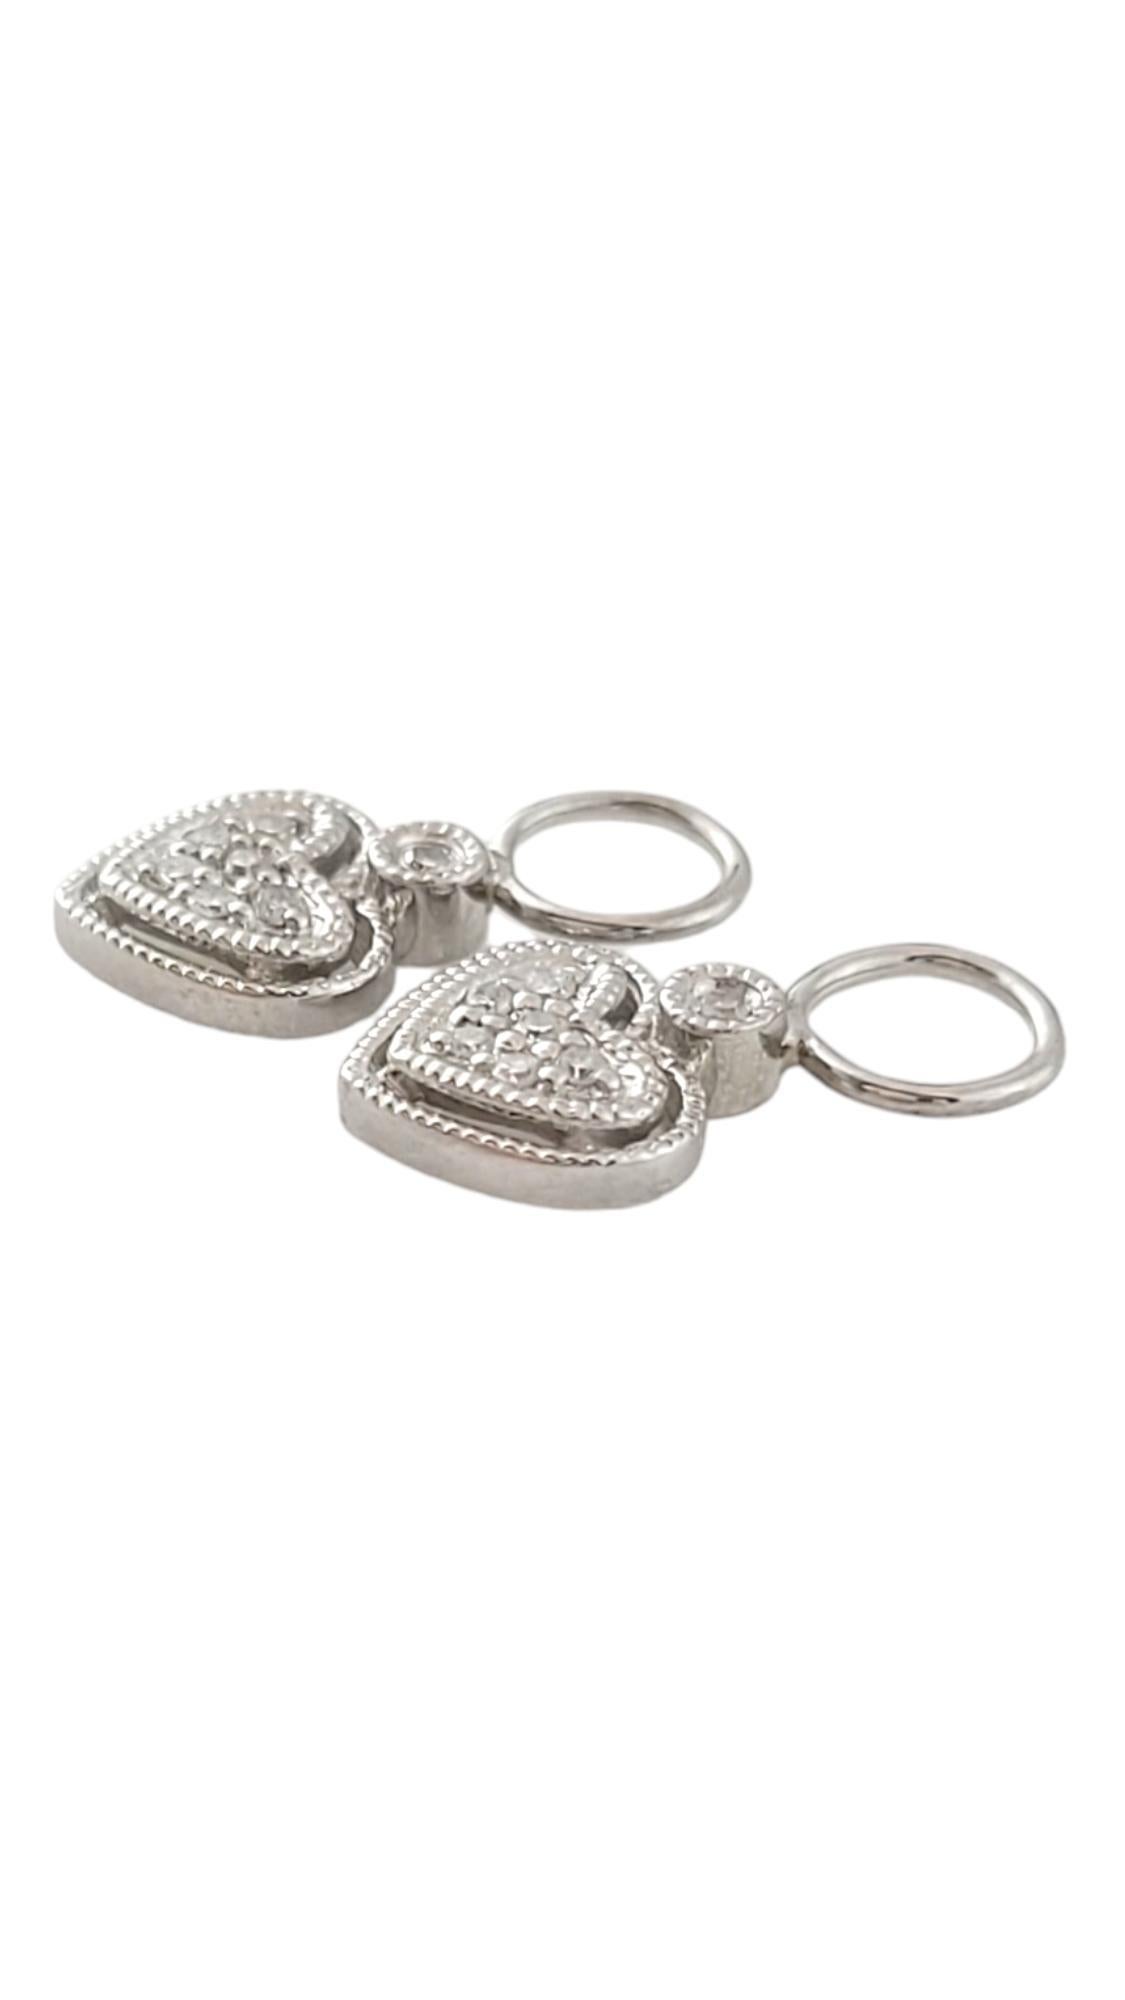 Vintage 14K White Gold Diamond Heart Earring Charms for Hoops -

Create a stylish combination with your hoop earrings and these adorable 14K white gold earring charms with 14 sparkling single cut diamonds! 

Approximate total diamond weight: .08